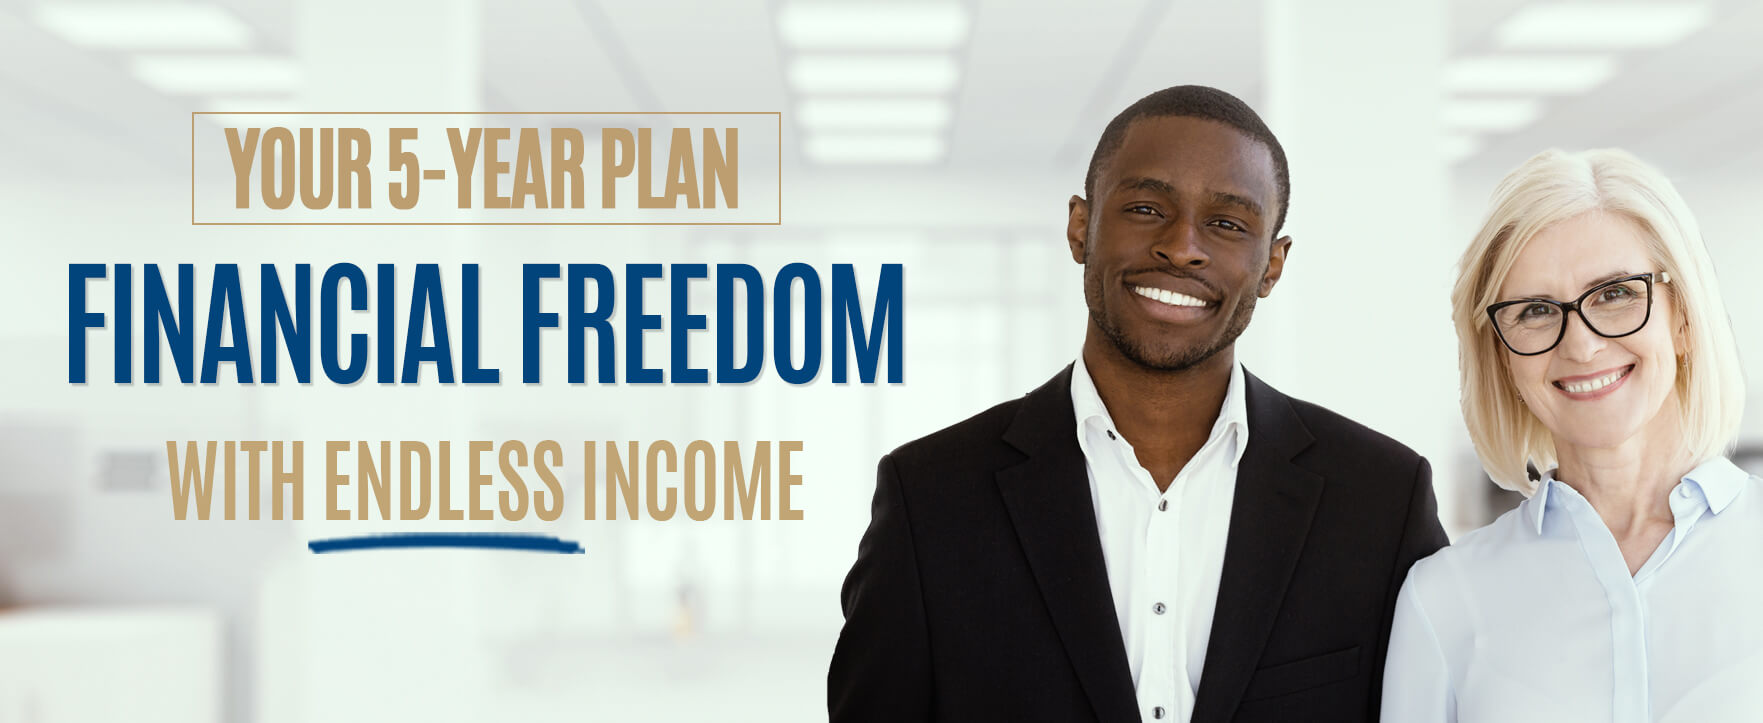 Your 5-Year Plan: earn $224k/year with full commission and lifetime renewals